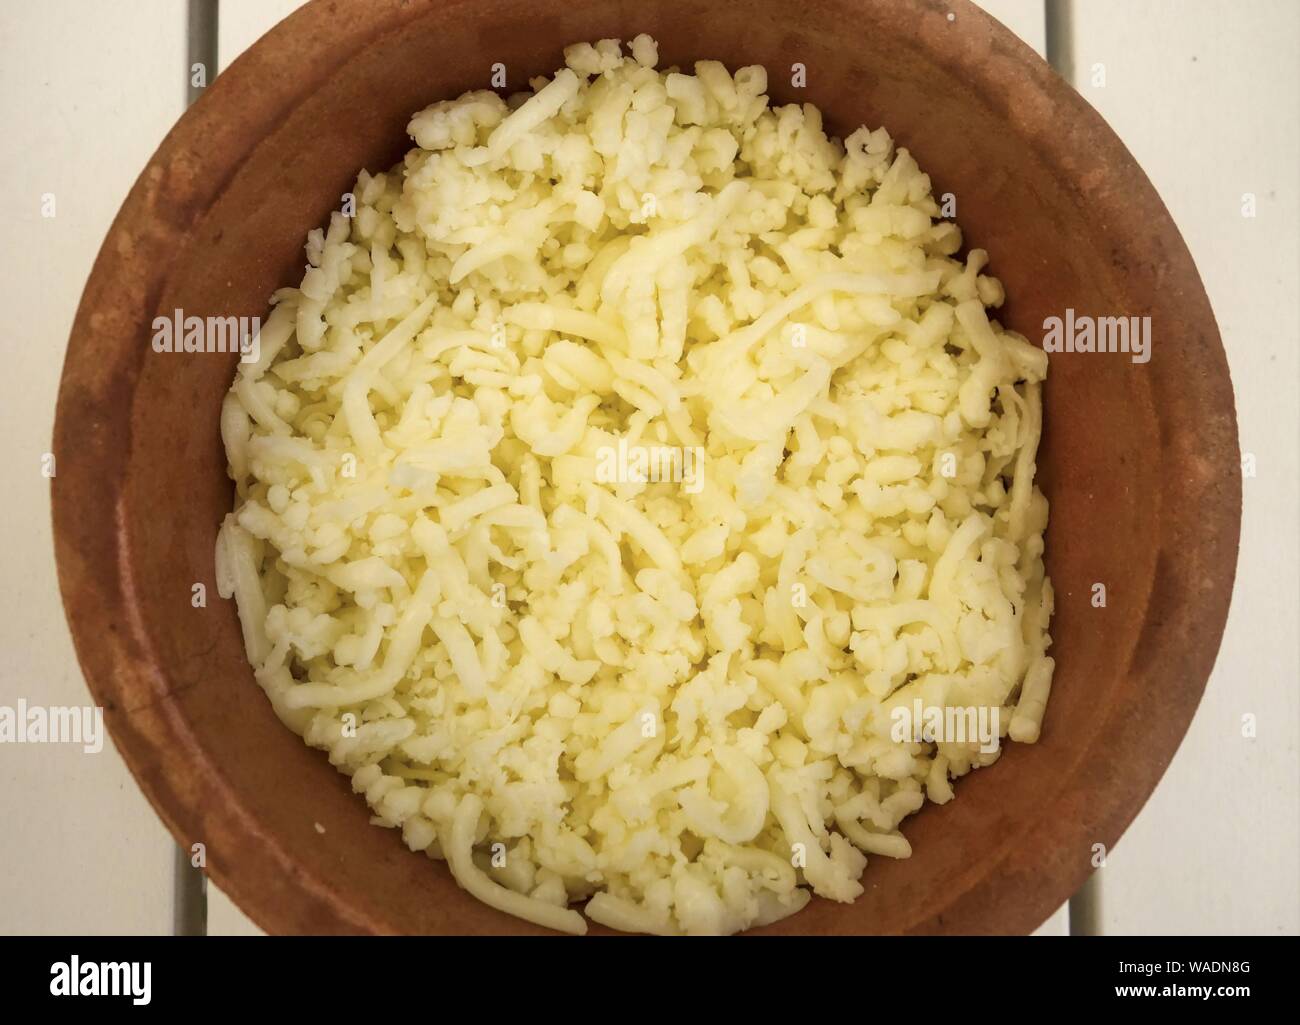 Bowl of Mixed Grated Cheeses Stock Photo